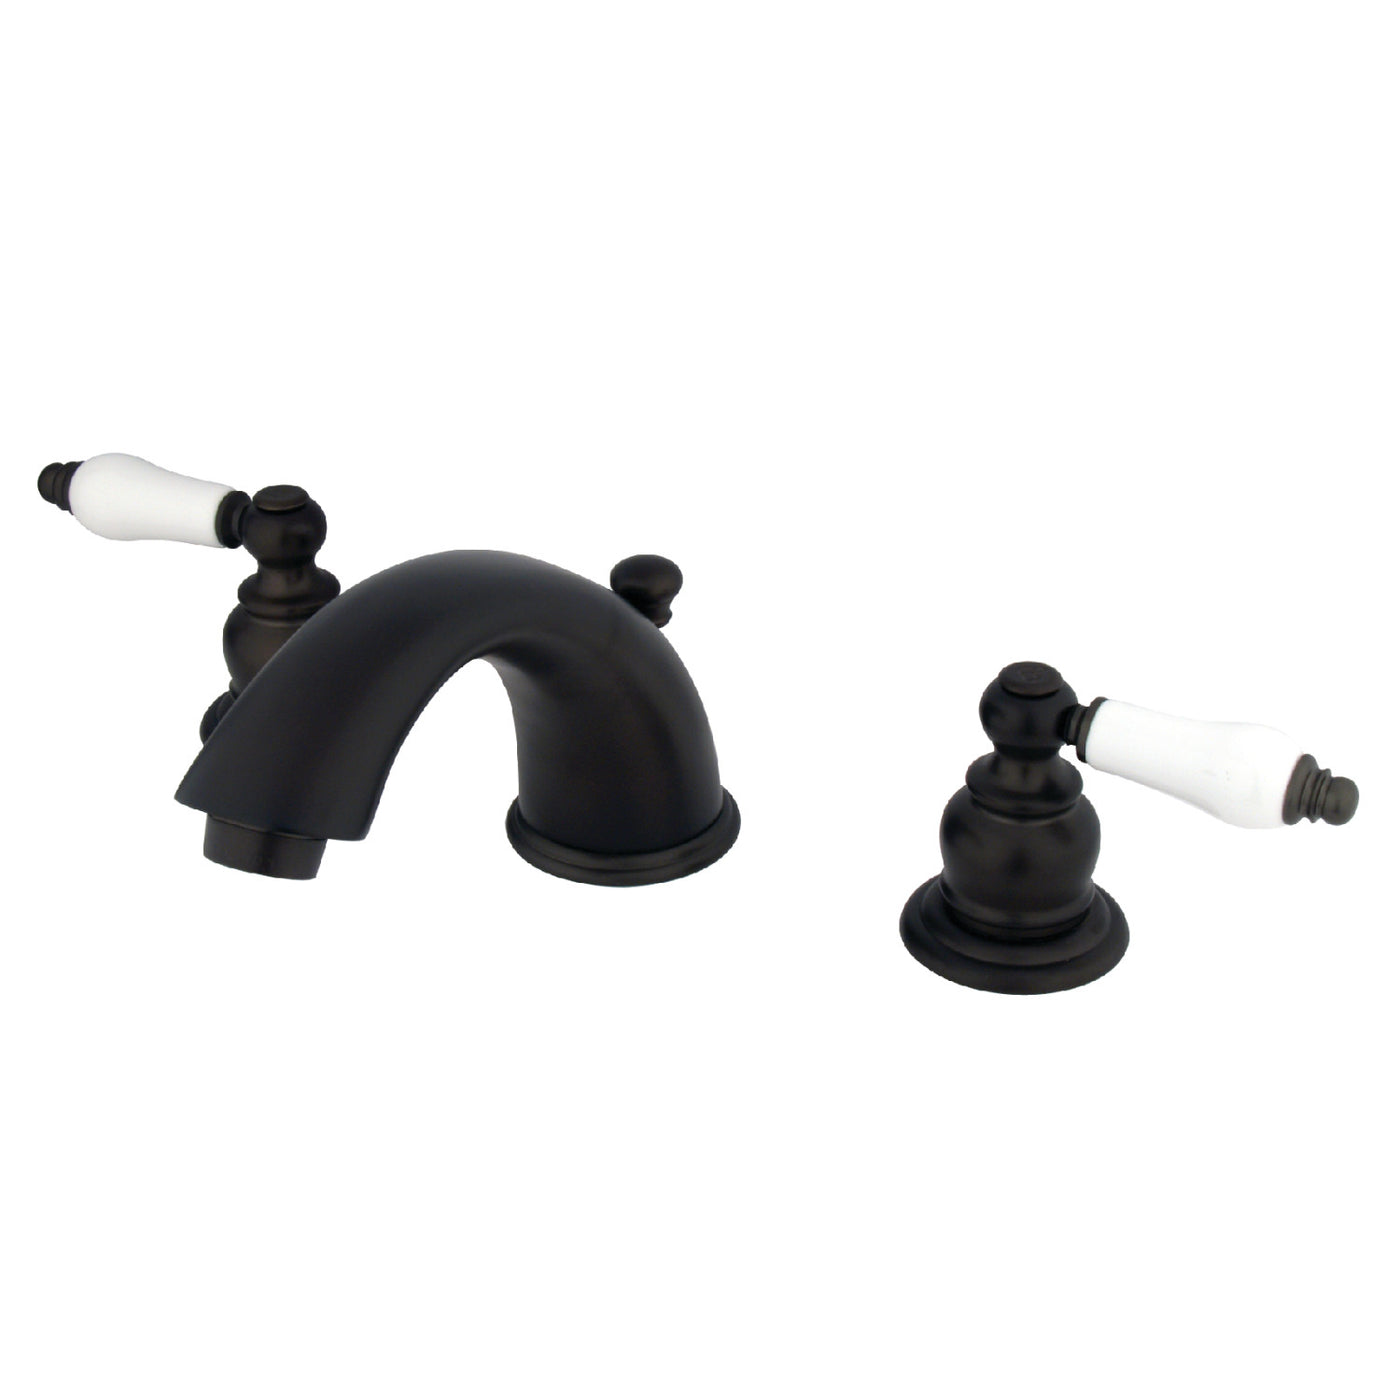 Elements of Design EB965PL Widespread Bathroom Faucet with Retail Pop-Up, Oil Rubbed Bronze